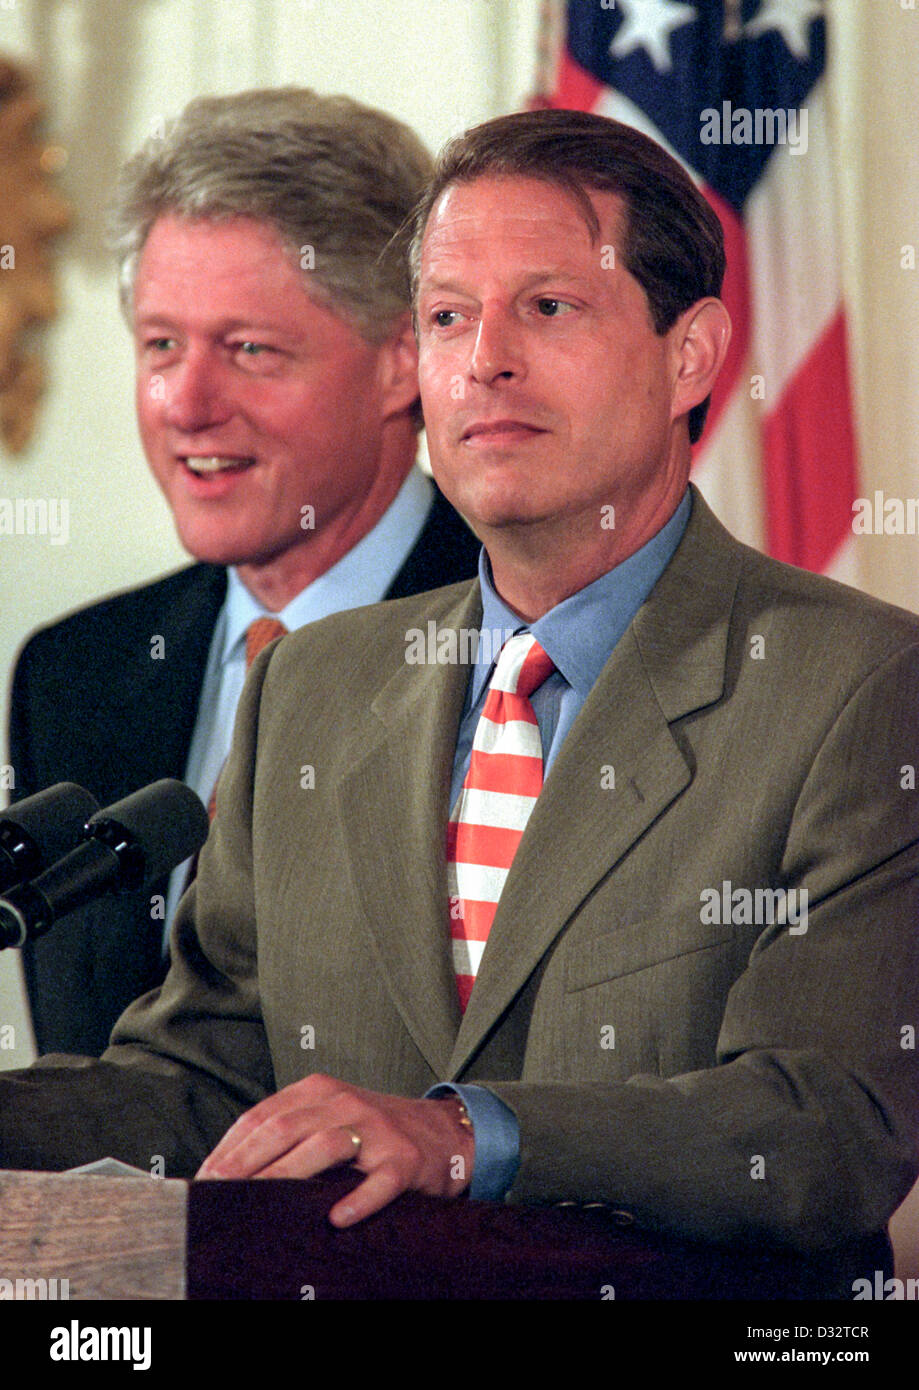 US President Bill Clinton and Vice President Al Gore during a light moment  at a White House event August 17, 1999 in Washington, DC Stock Photo - Alamy